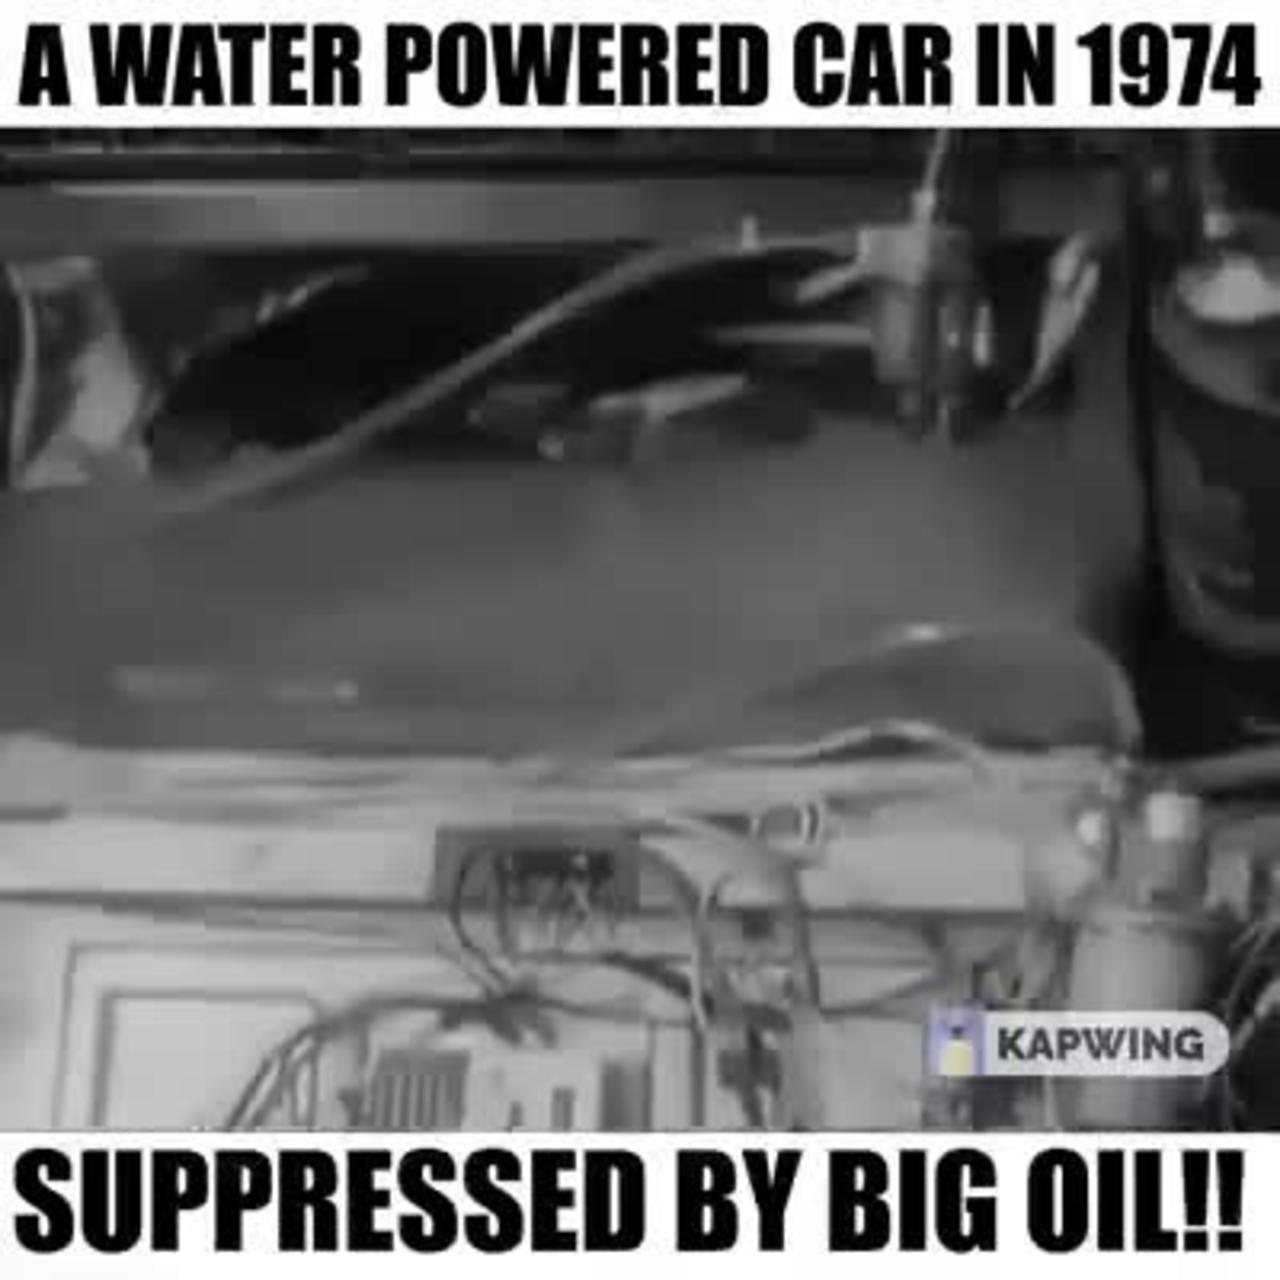 — NEXT LIE — A WATER POWERED CAR IN 1974 — SUPPRESSED BY BIG OIL GLOBALISTS